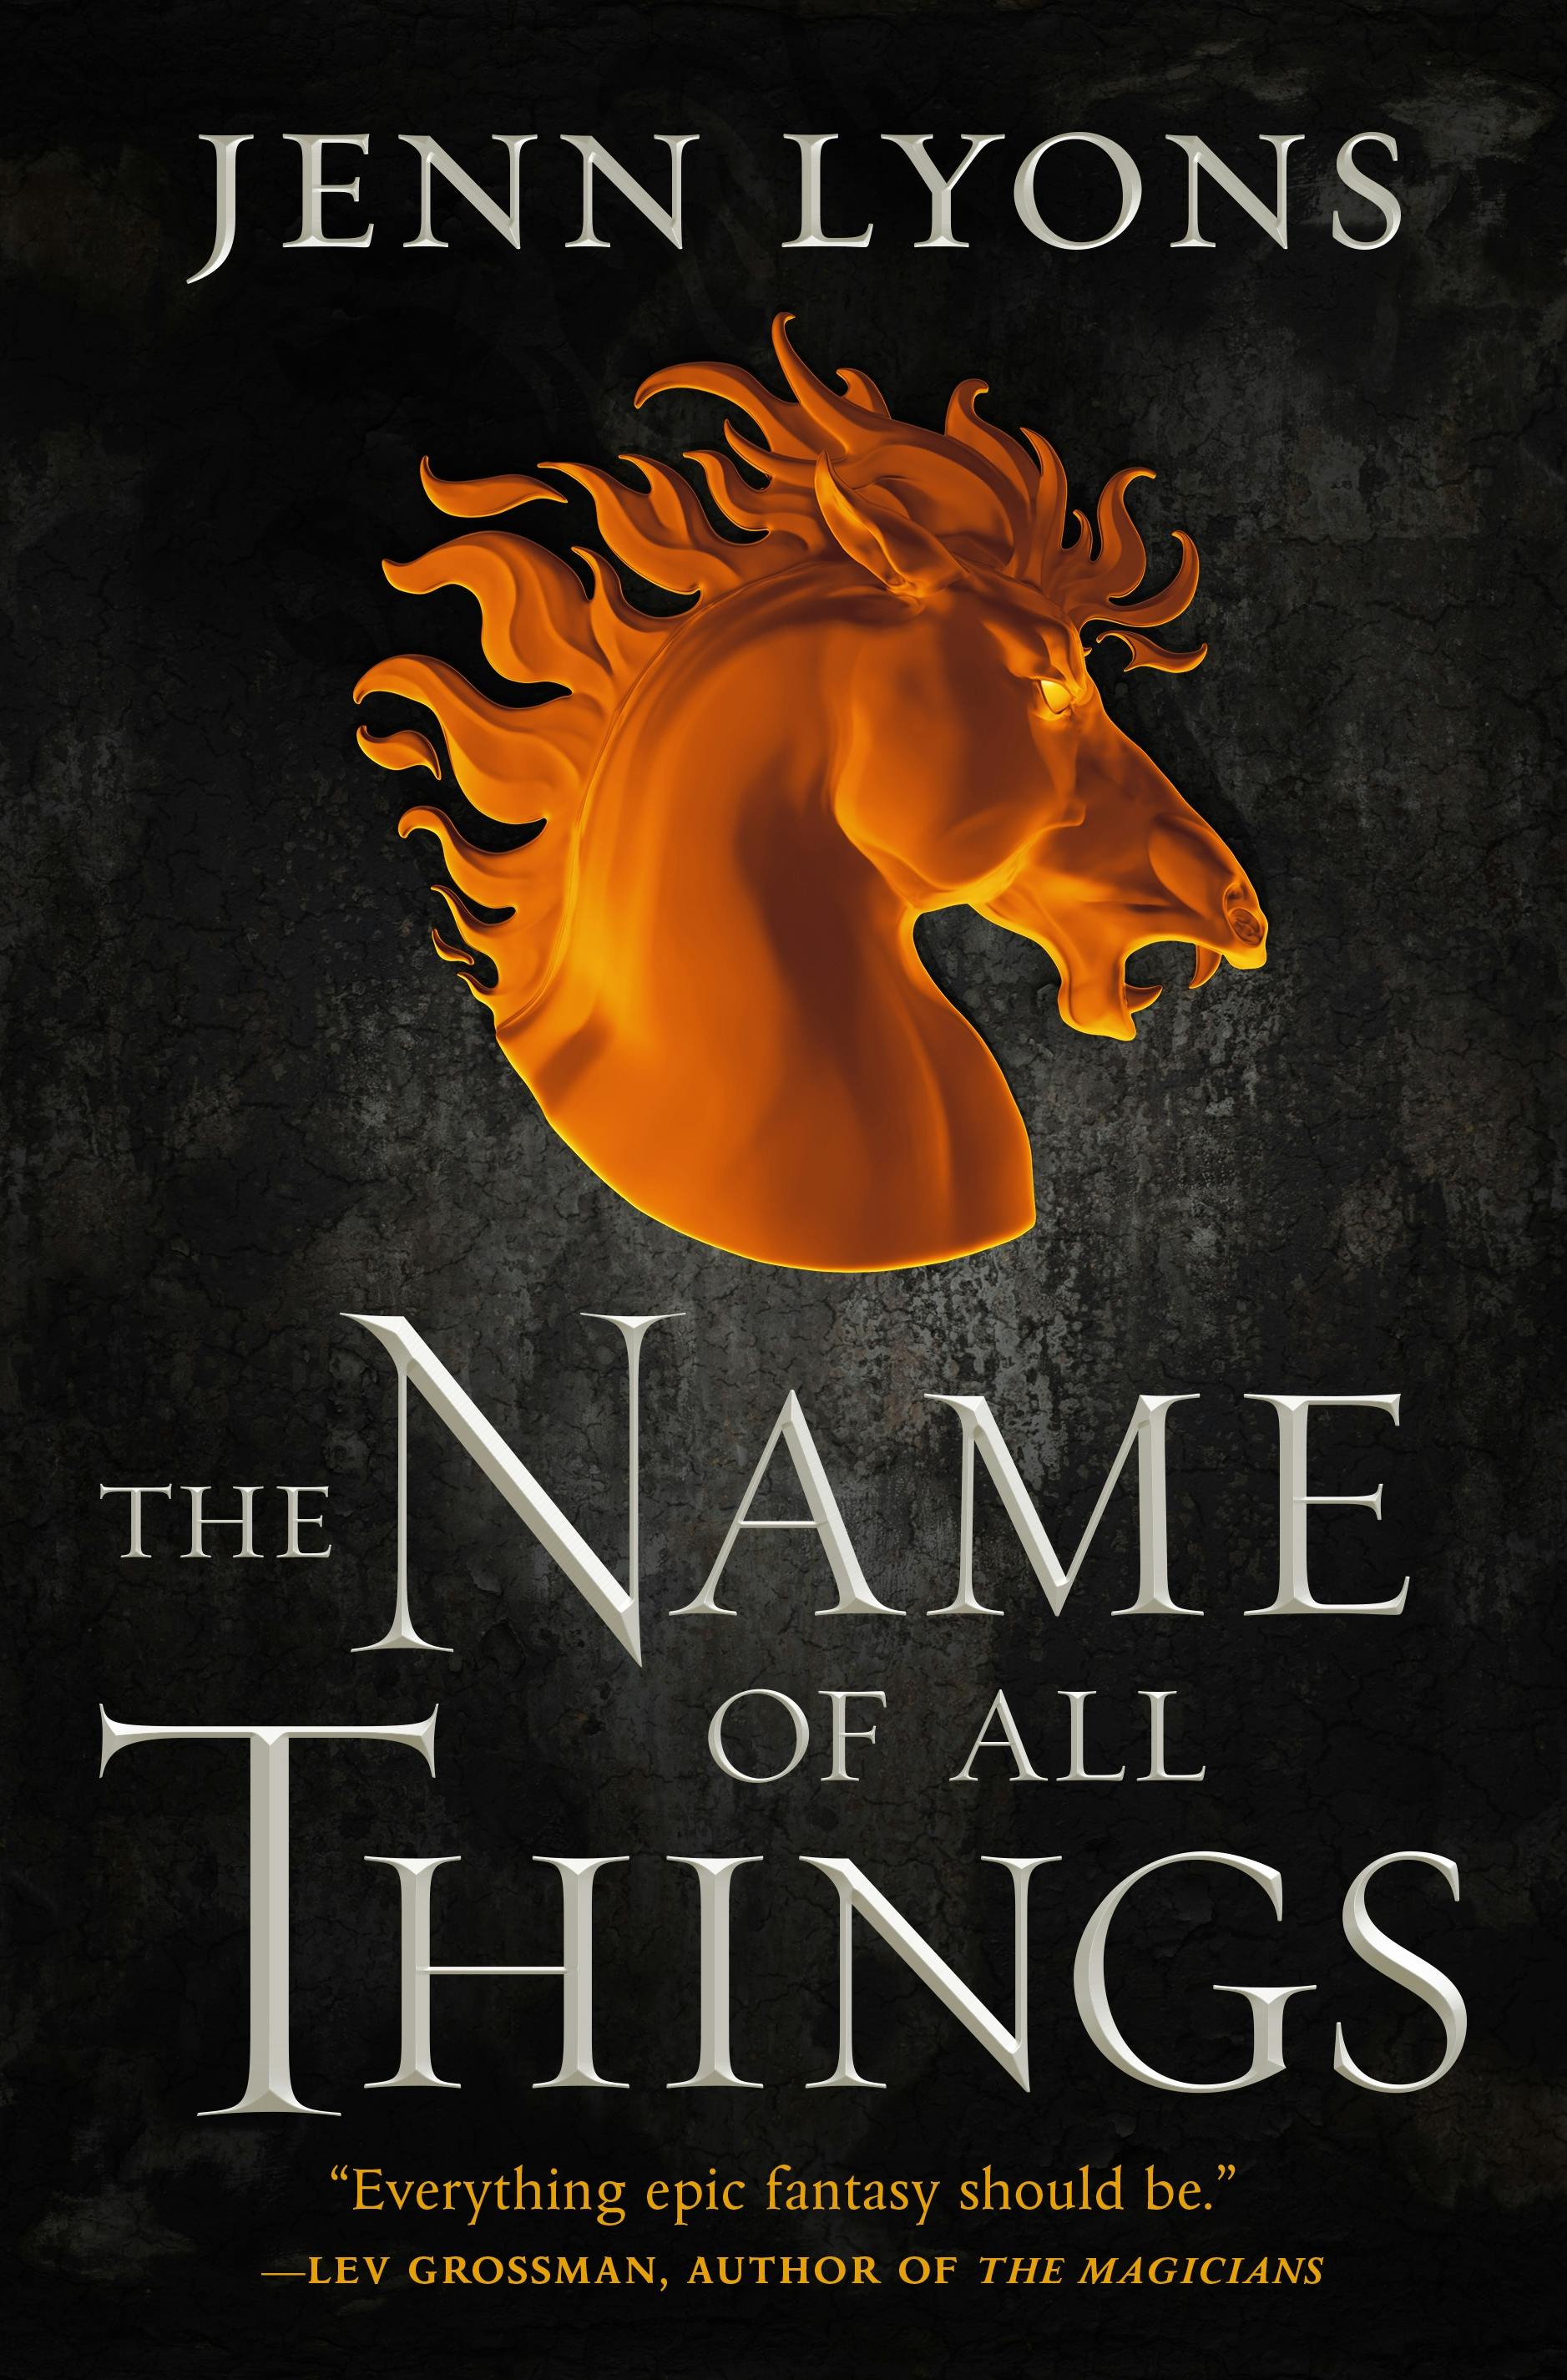 Cover for the book titled as: The Name of All Things